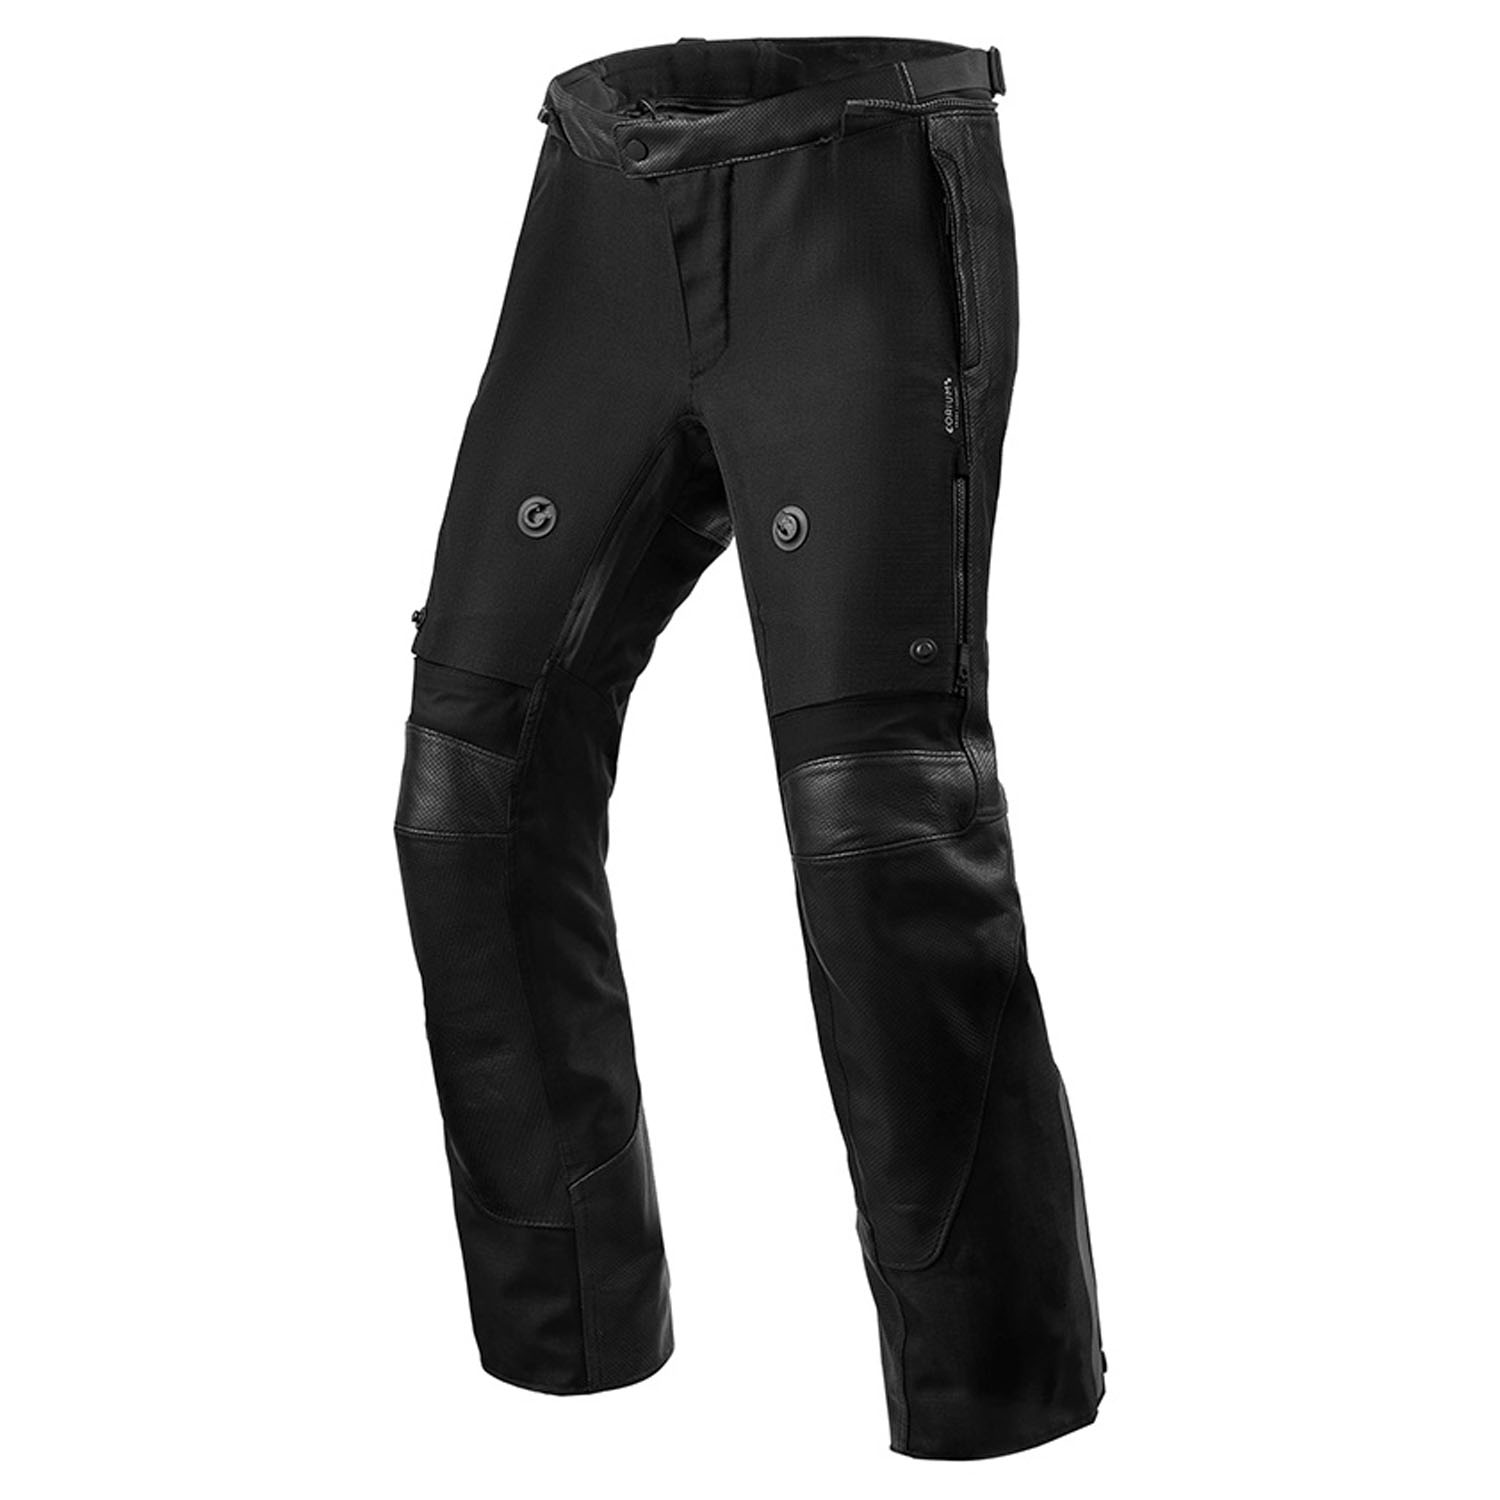 Image of EU REV'IT! Trousers Valve H2O Black Long Motorcycle Pants Taille 54